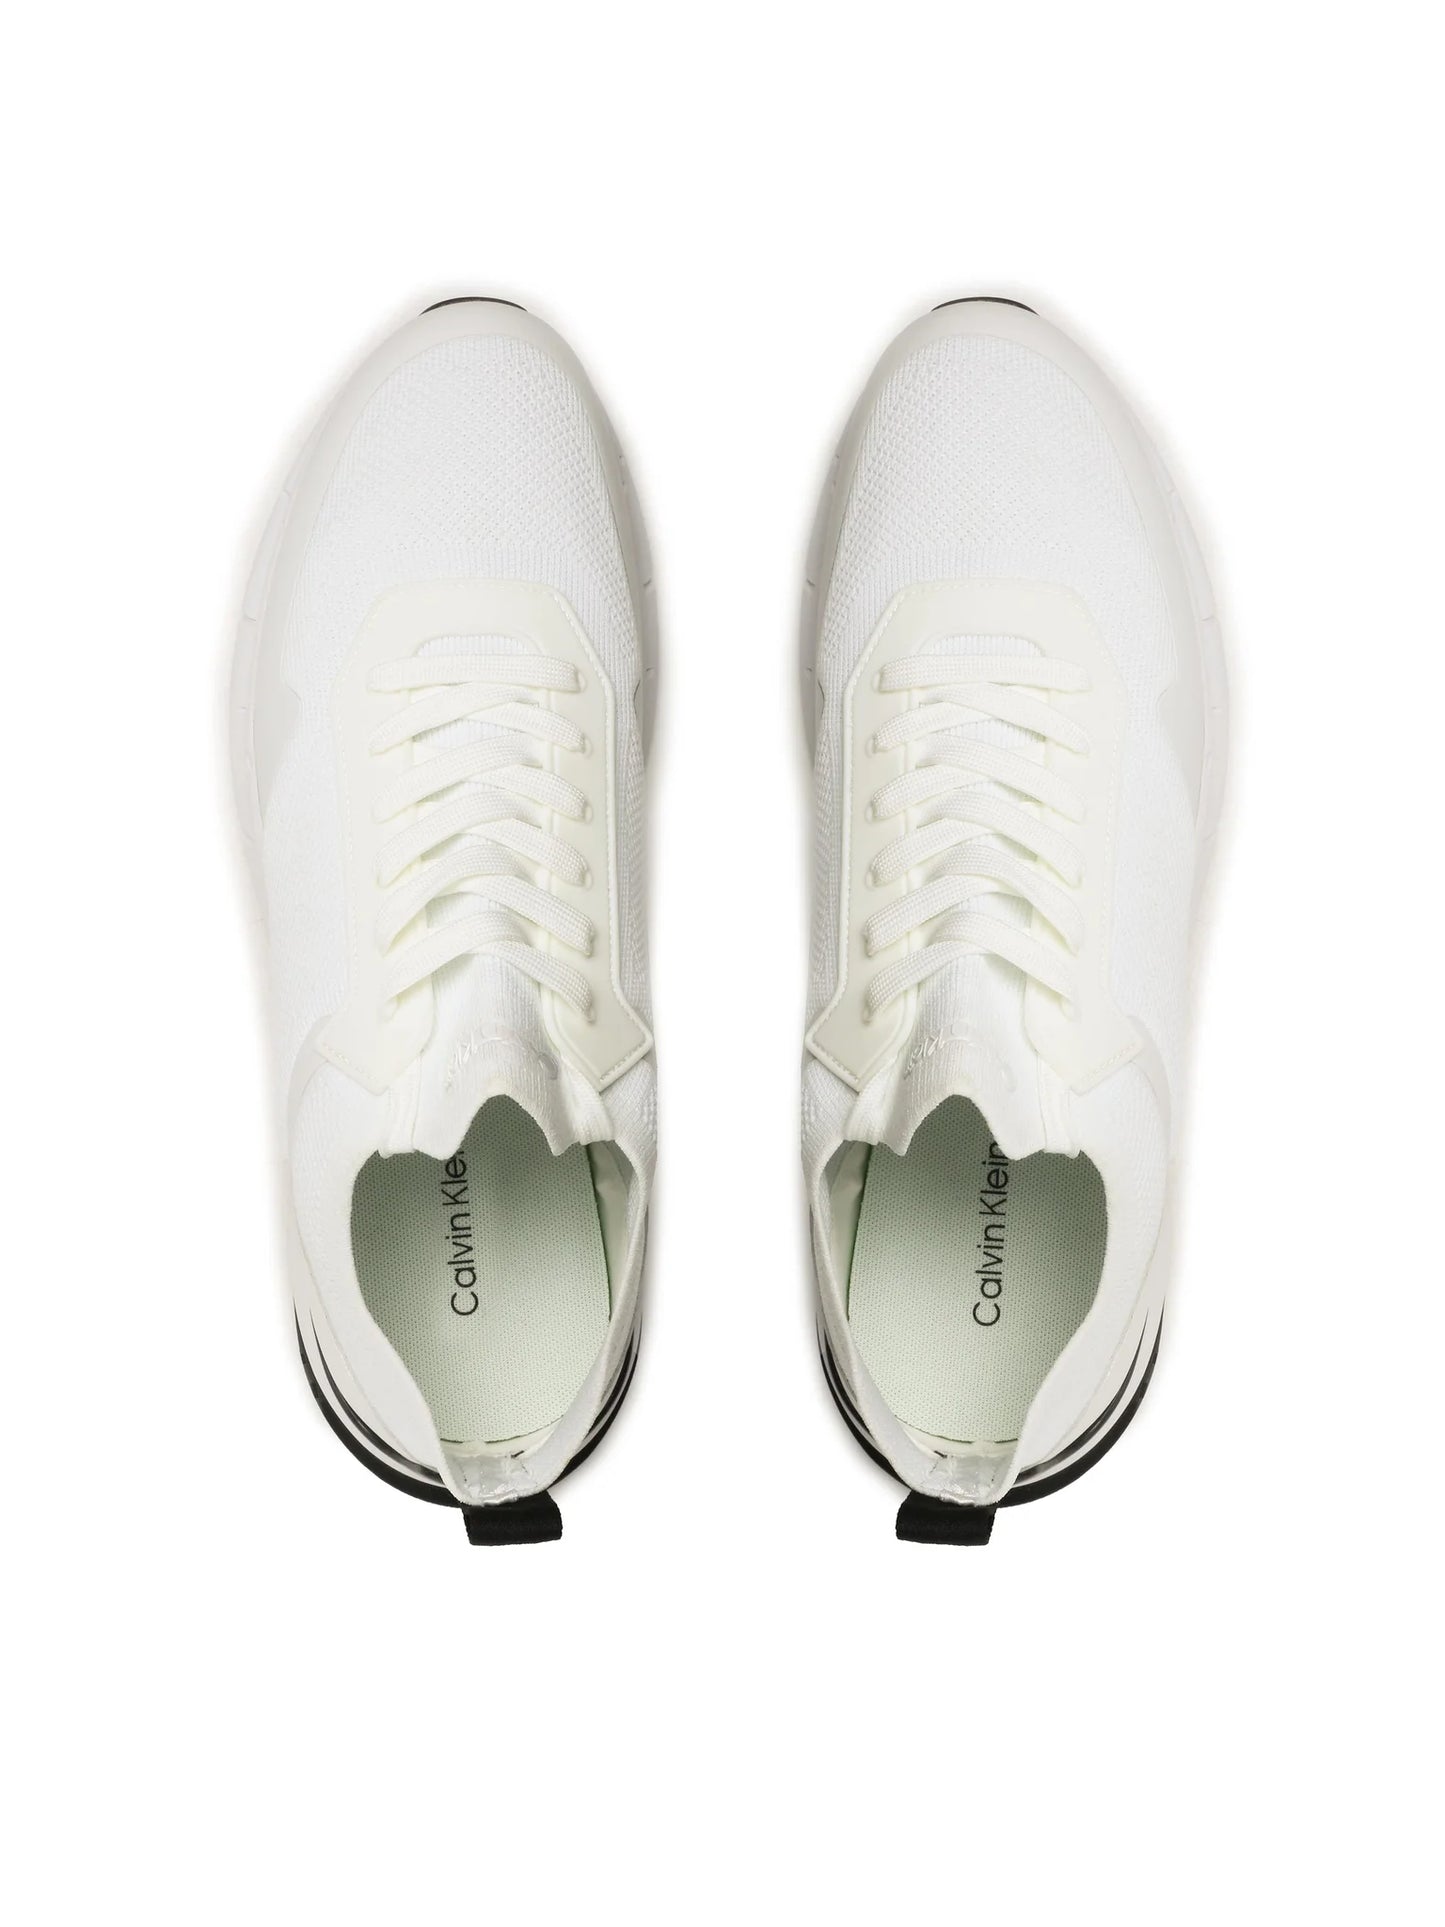 CALVIN KLEIN  Sneakers Low Top Lace Up Mix White